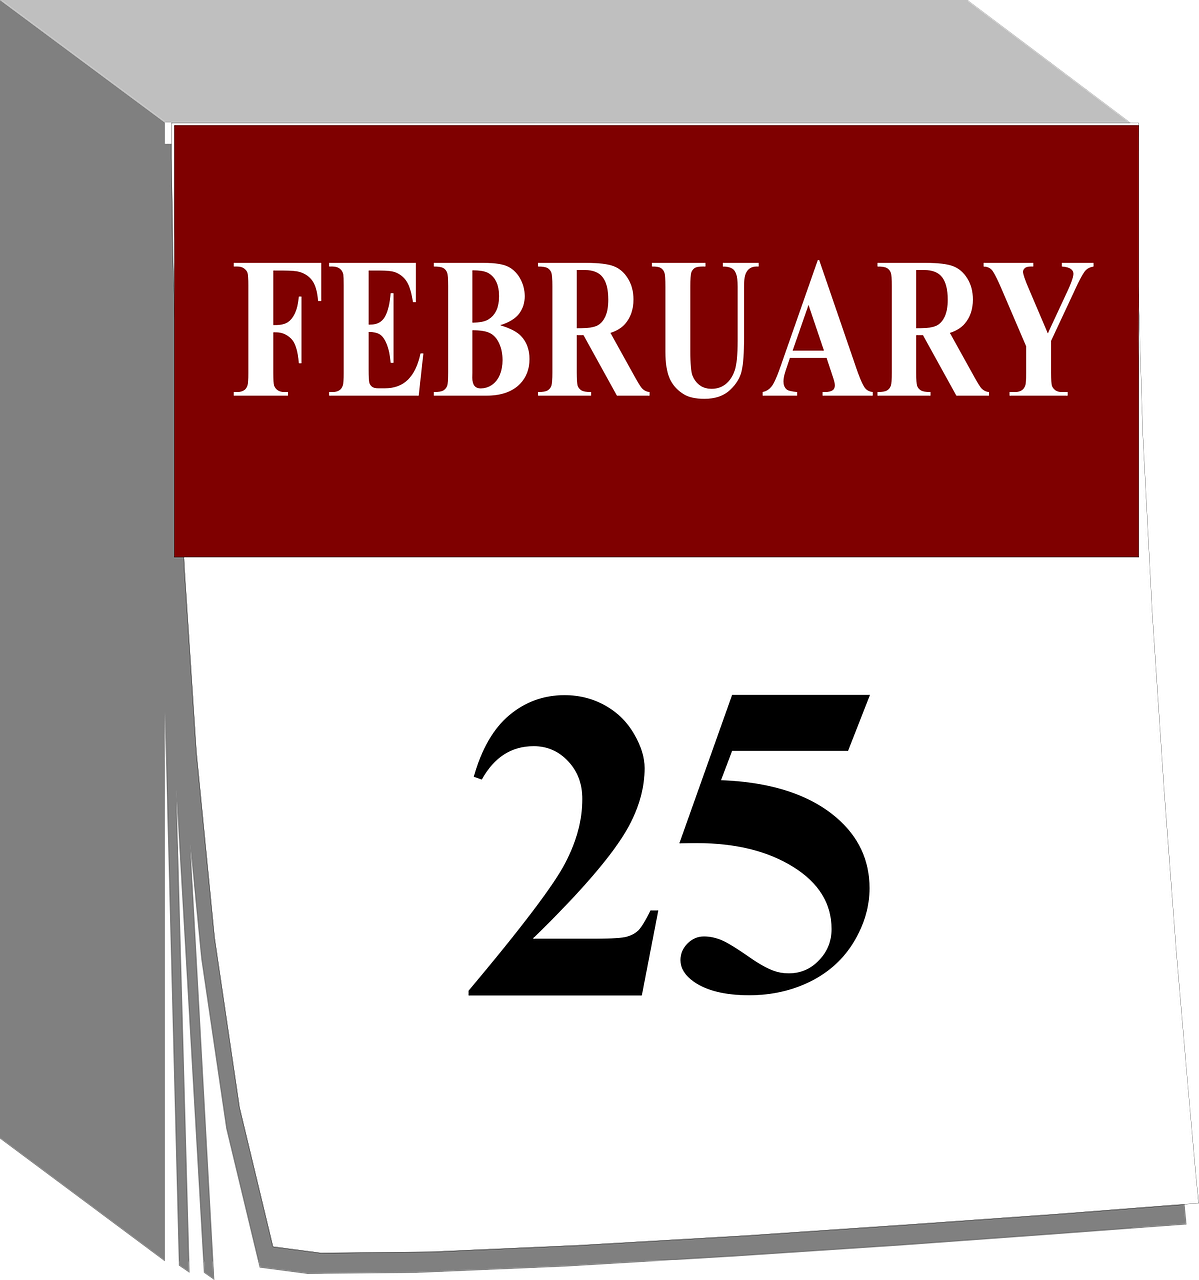 A calendar page with date February 25th